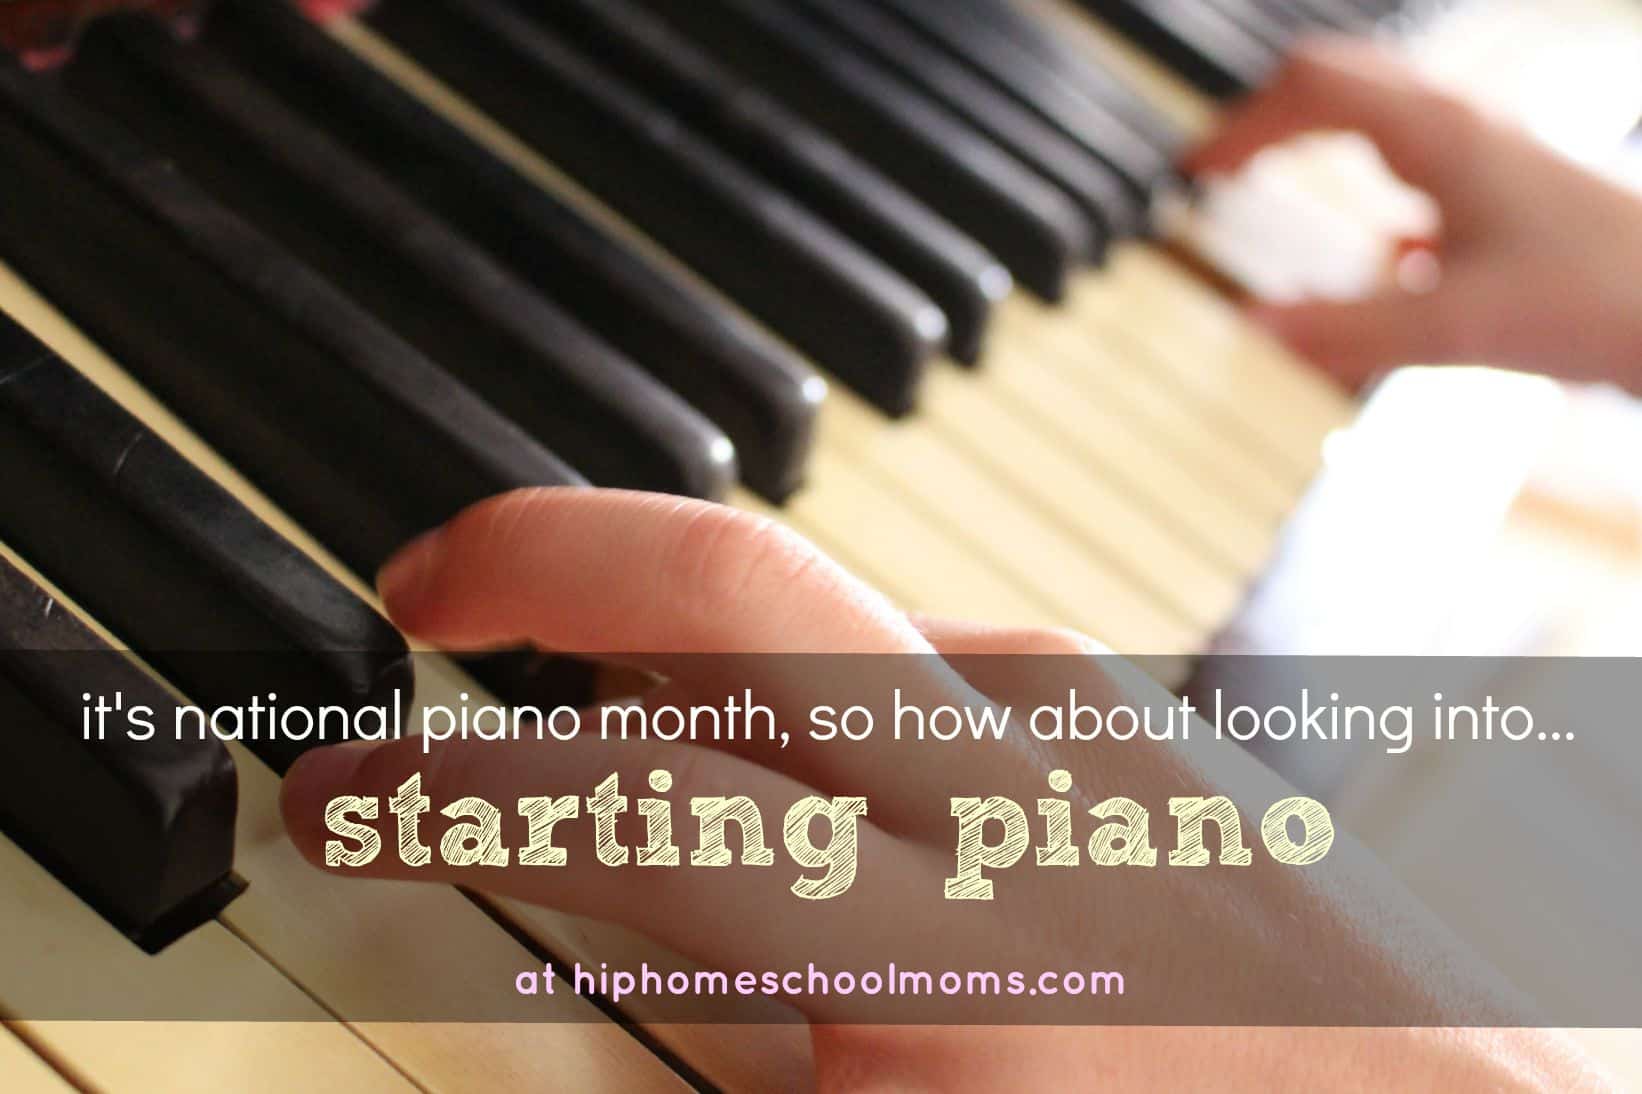 Starting Piano in National Piano Month